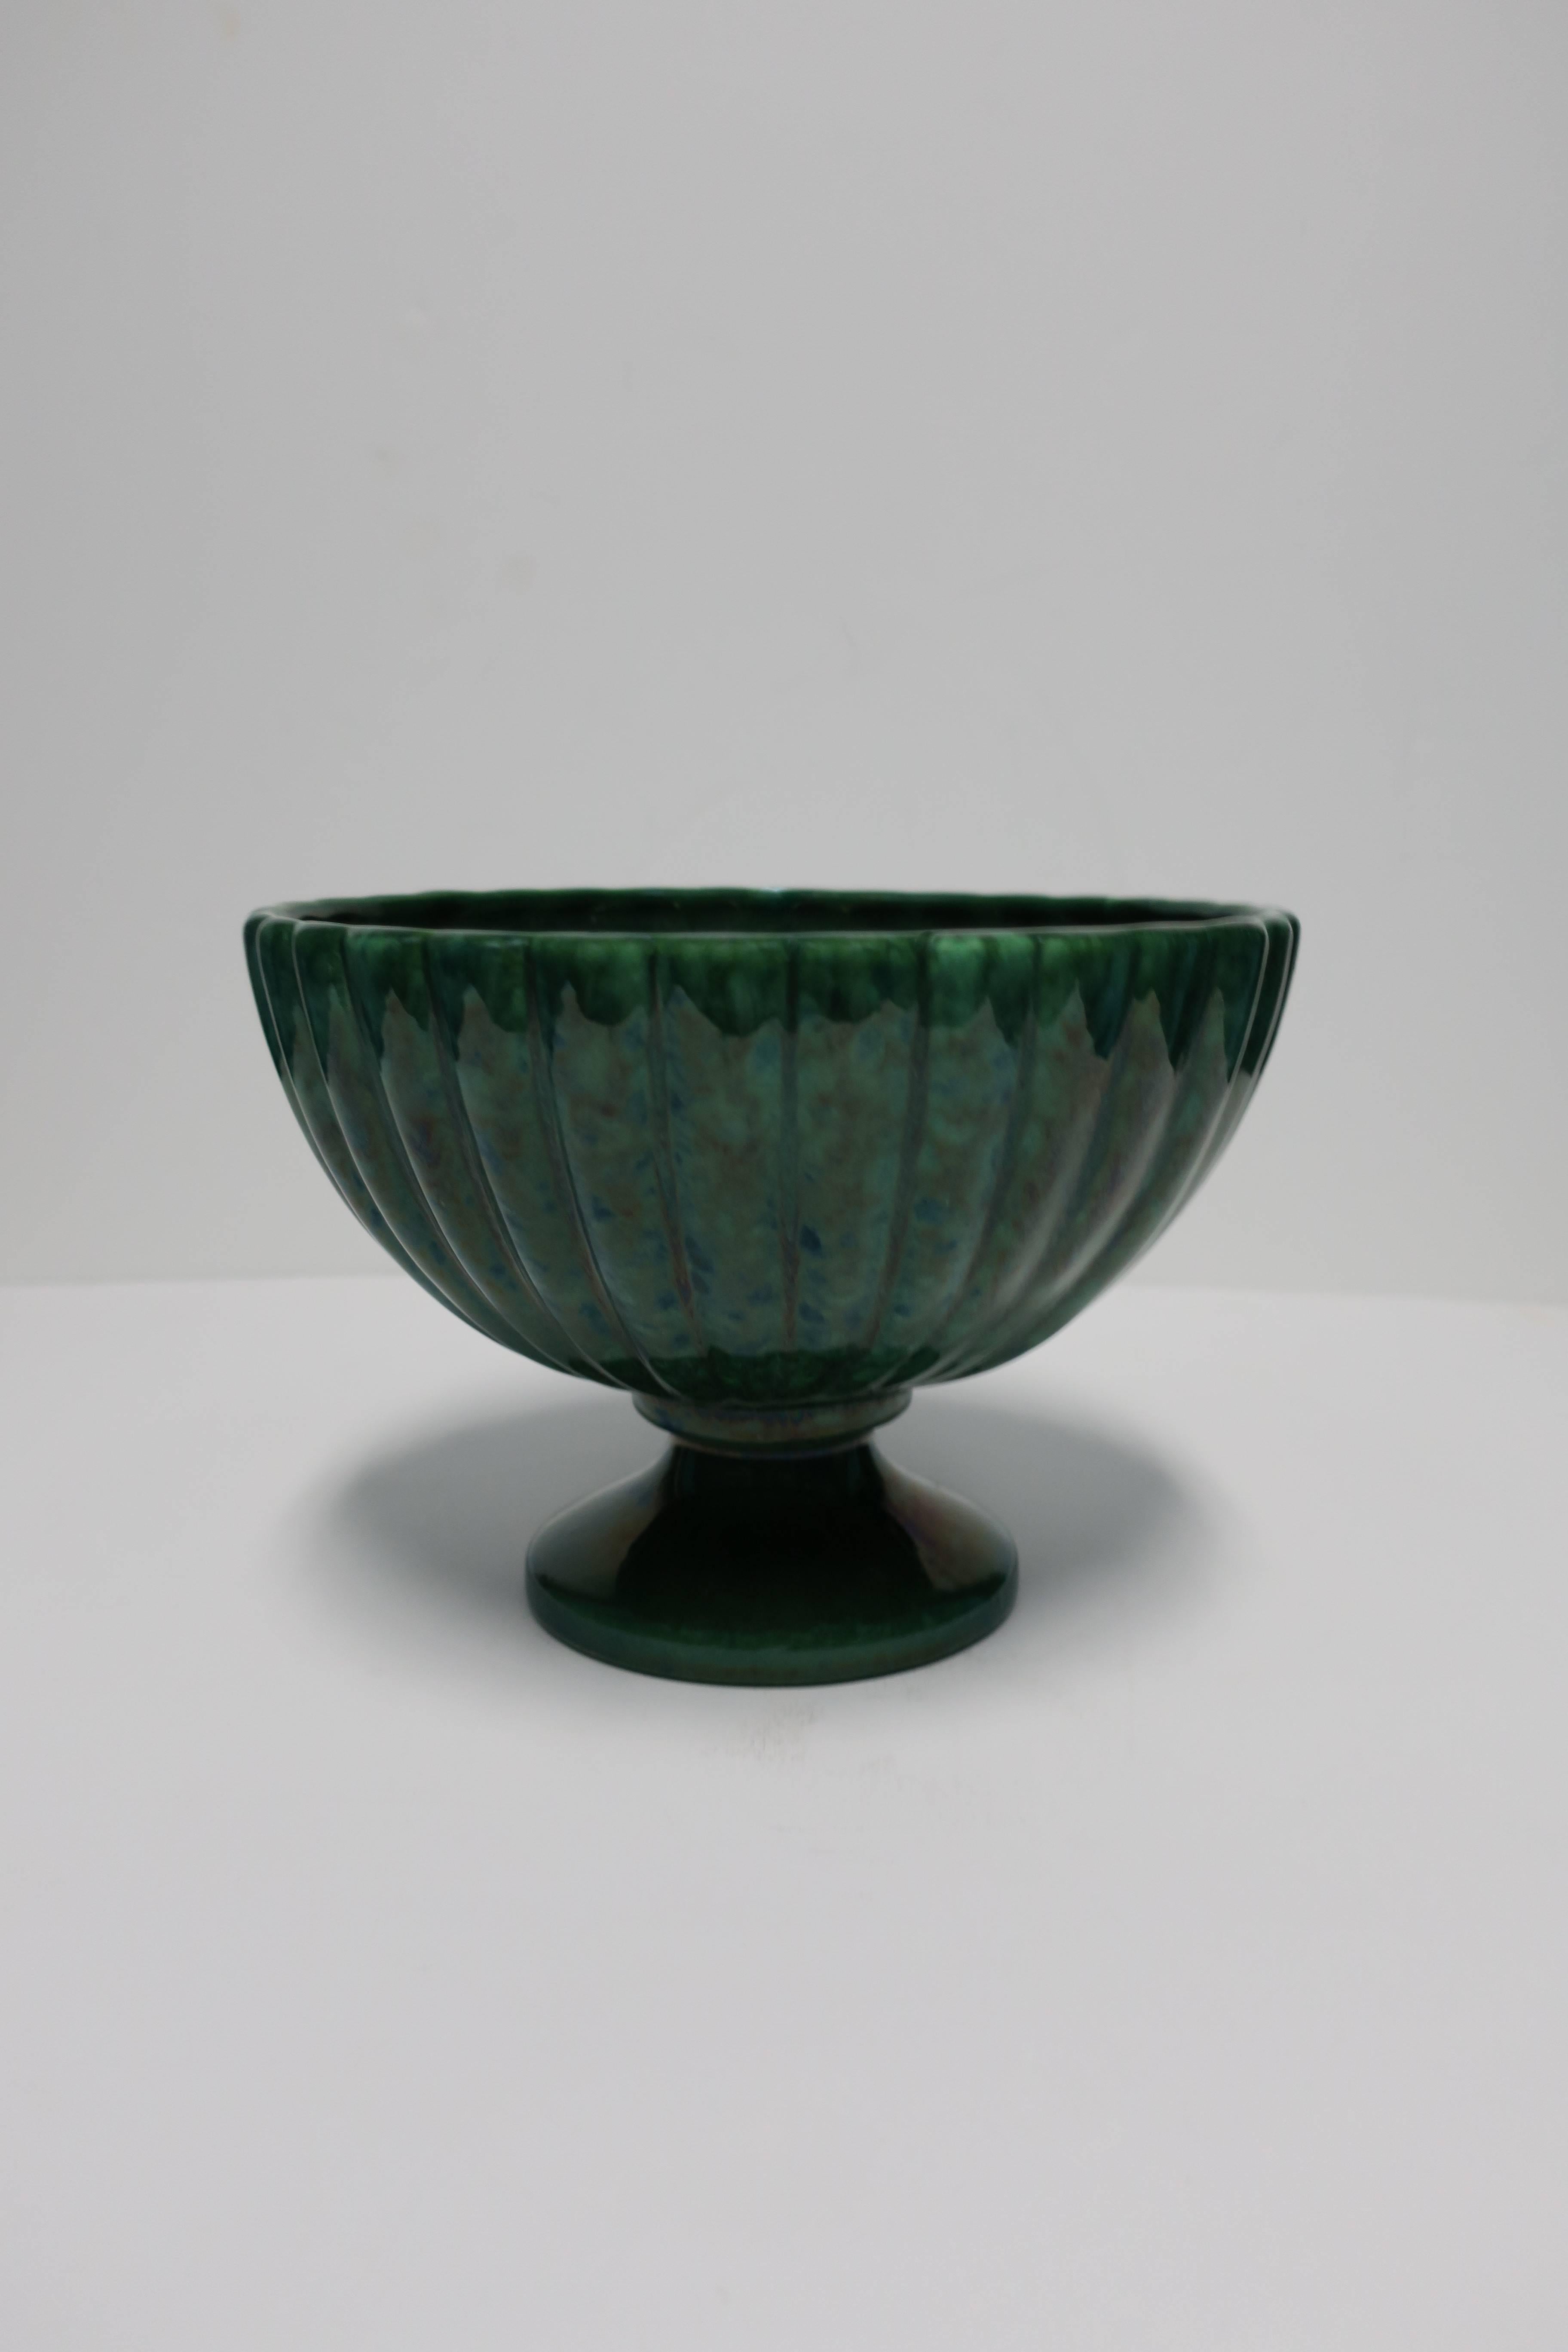 A beautiful vintage large Art Deco hunter green fluted glazed pottery urn with round pedestal base, circa 1930s. With maker's mark on bottom as shown in image. Measurements include: 7